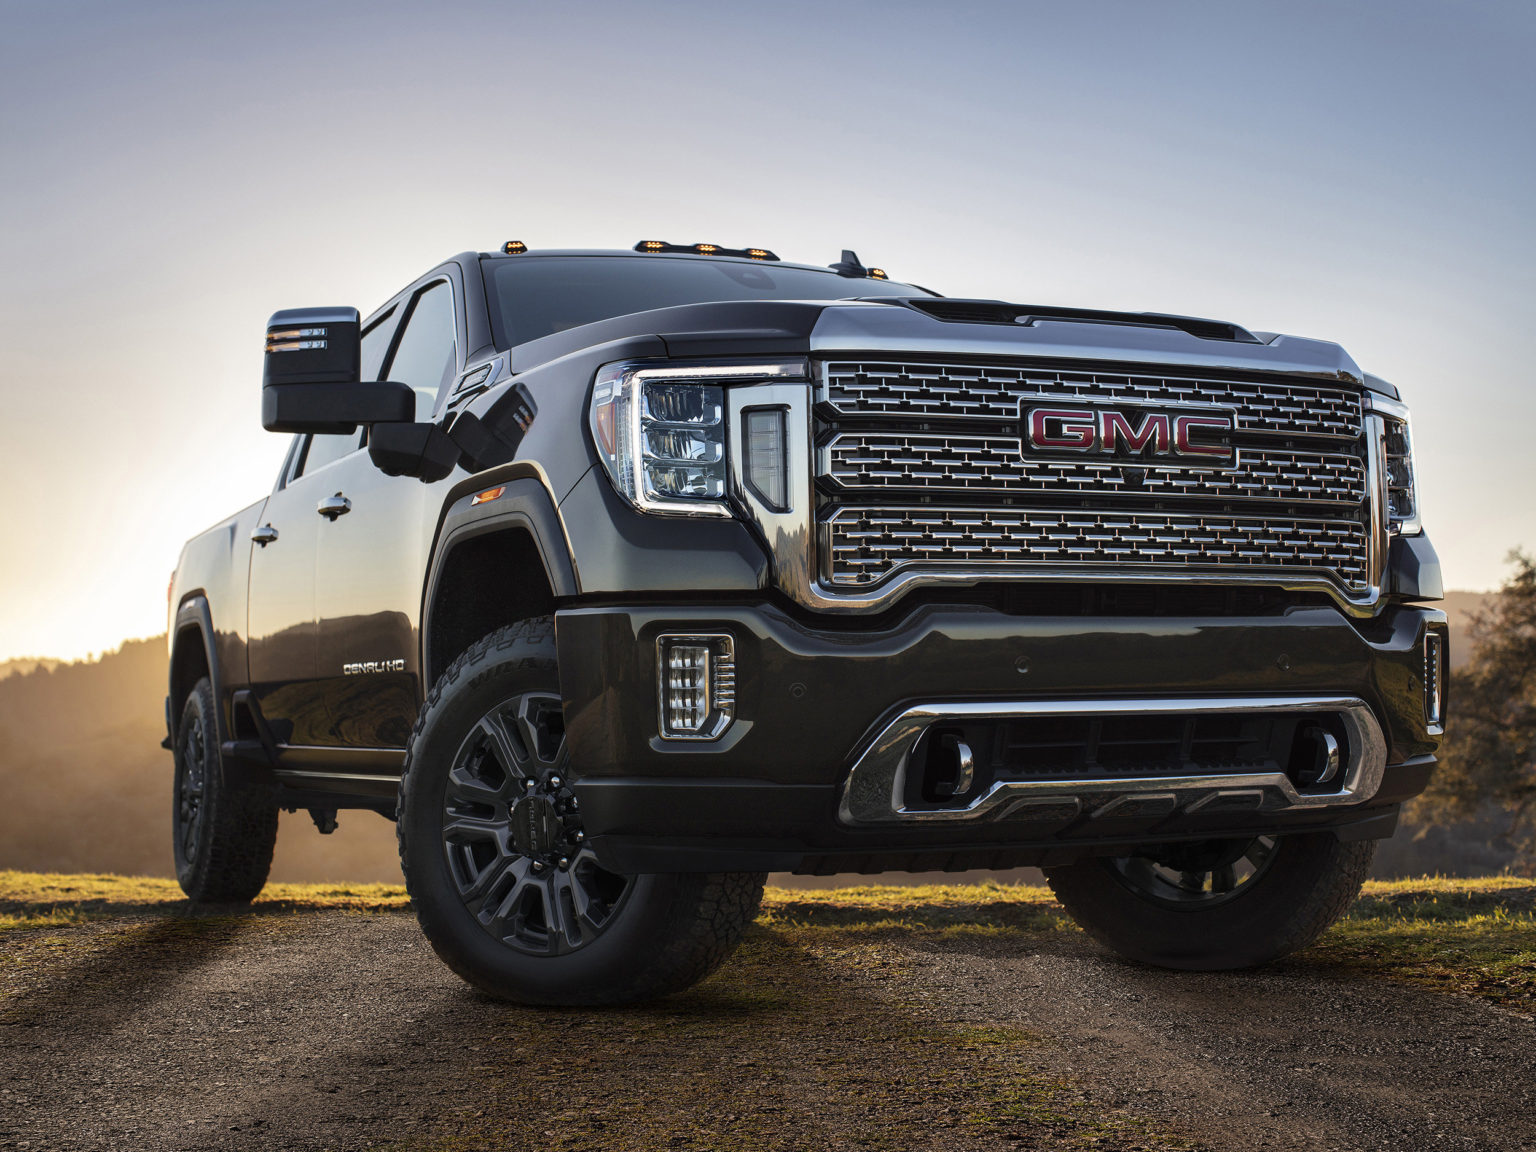 The Sierra HD Denali Black Diamond Edition is a new addition to the lineup for 2021.